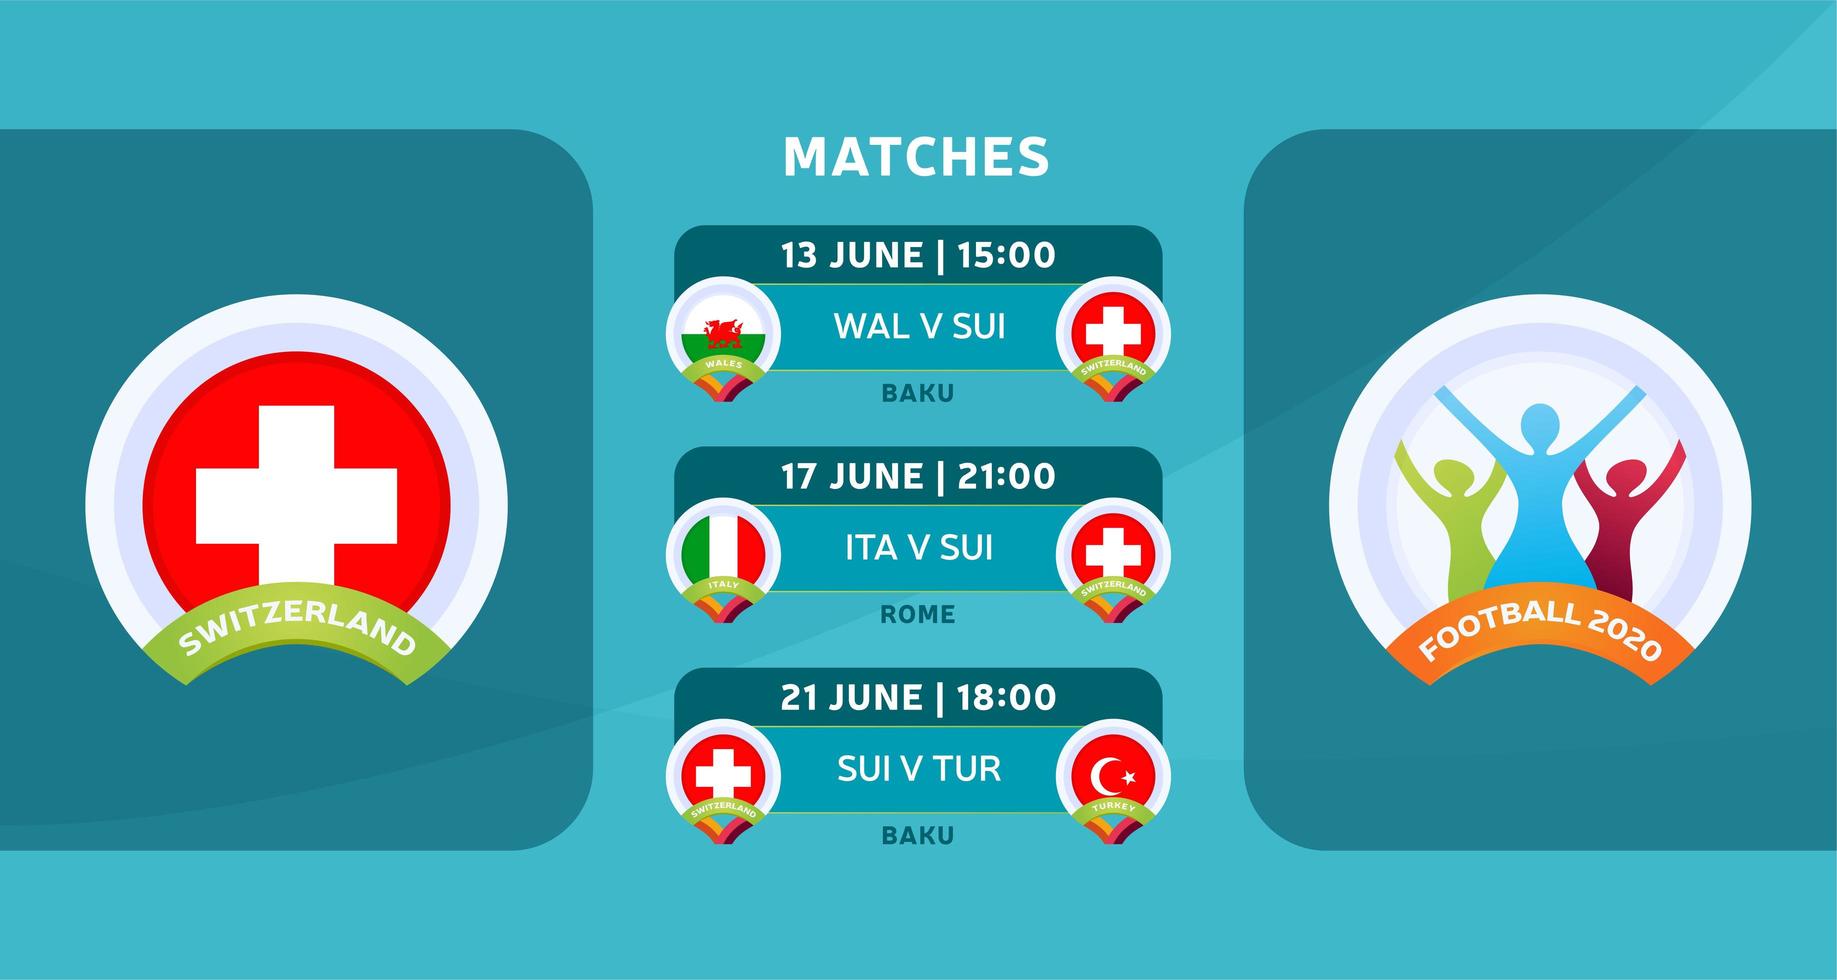 Schedule of matches of the Switzerland national team in the final stage at the European Football Championship 2020. Vector illustration with the official gravel of football matches.